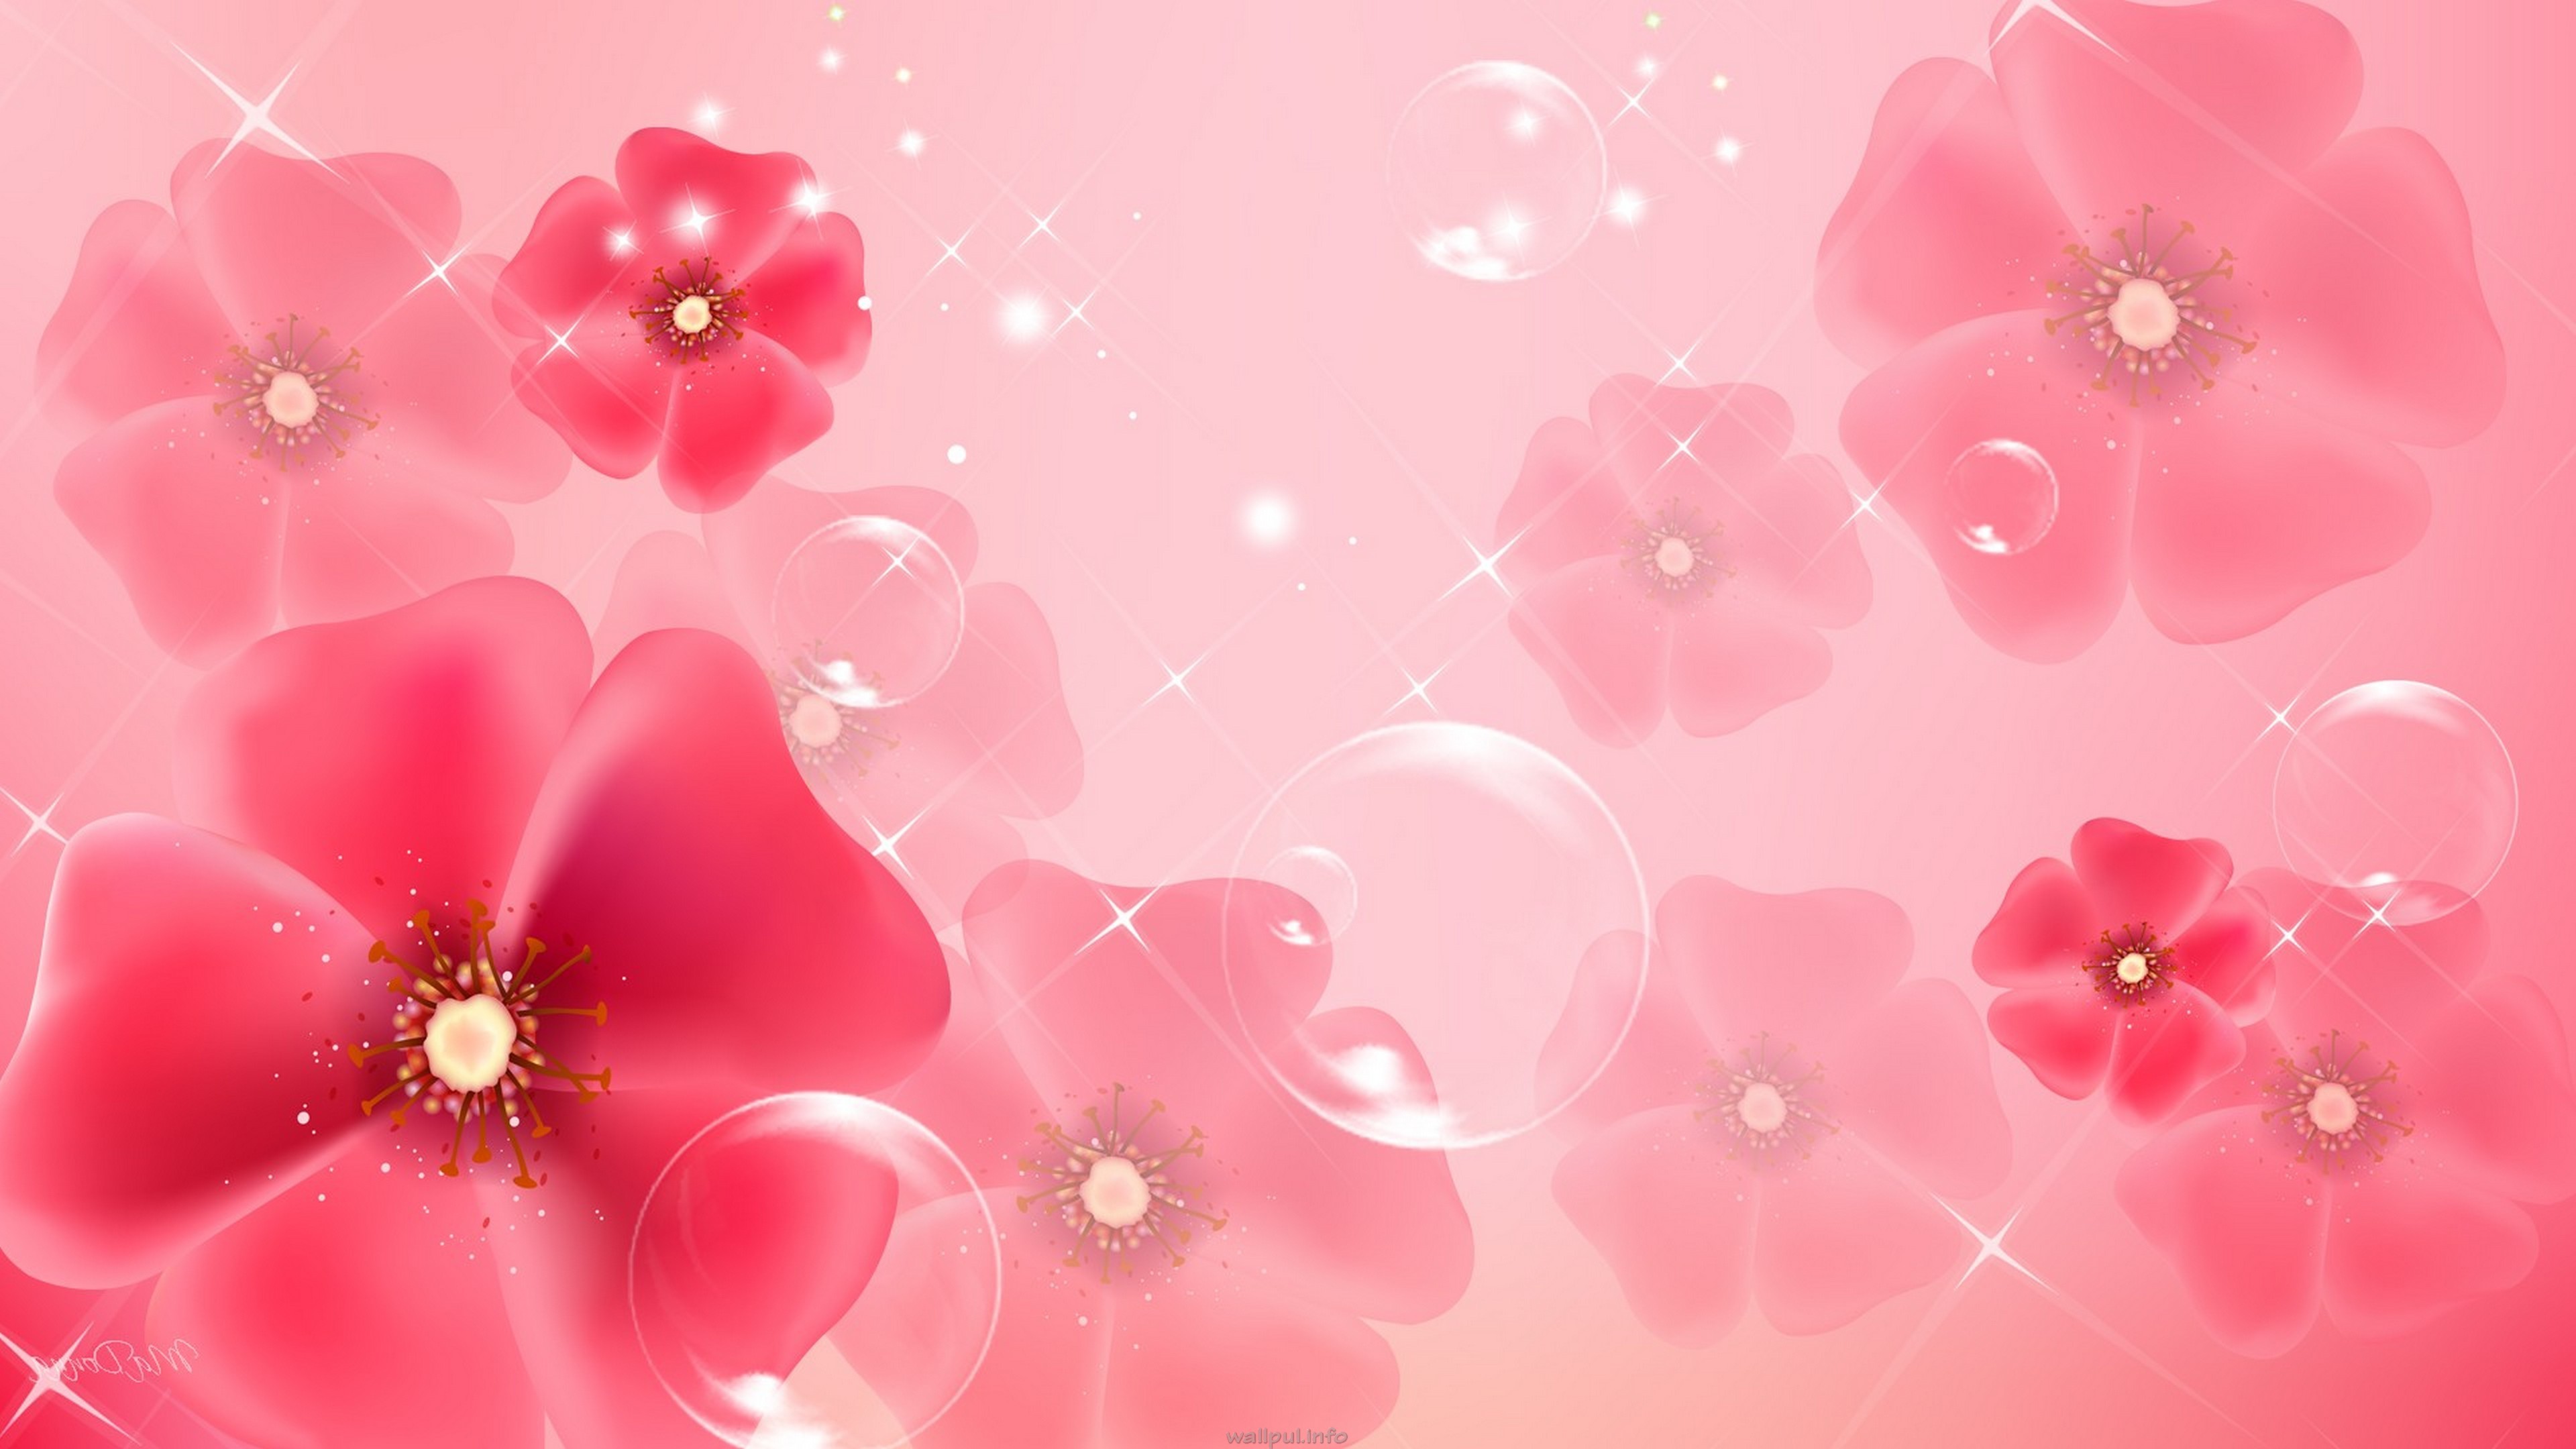 3840x2160 ... Color 4k Pink Ultra Hd Wallpapers Computer Backgrounds Wallpaper HD ...